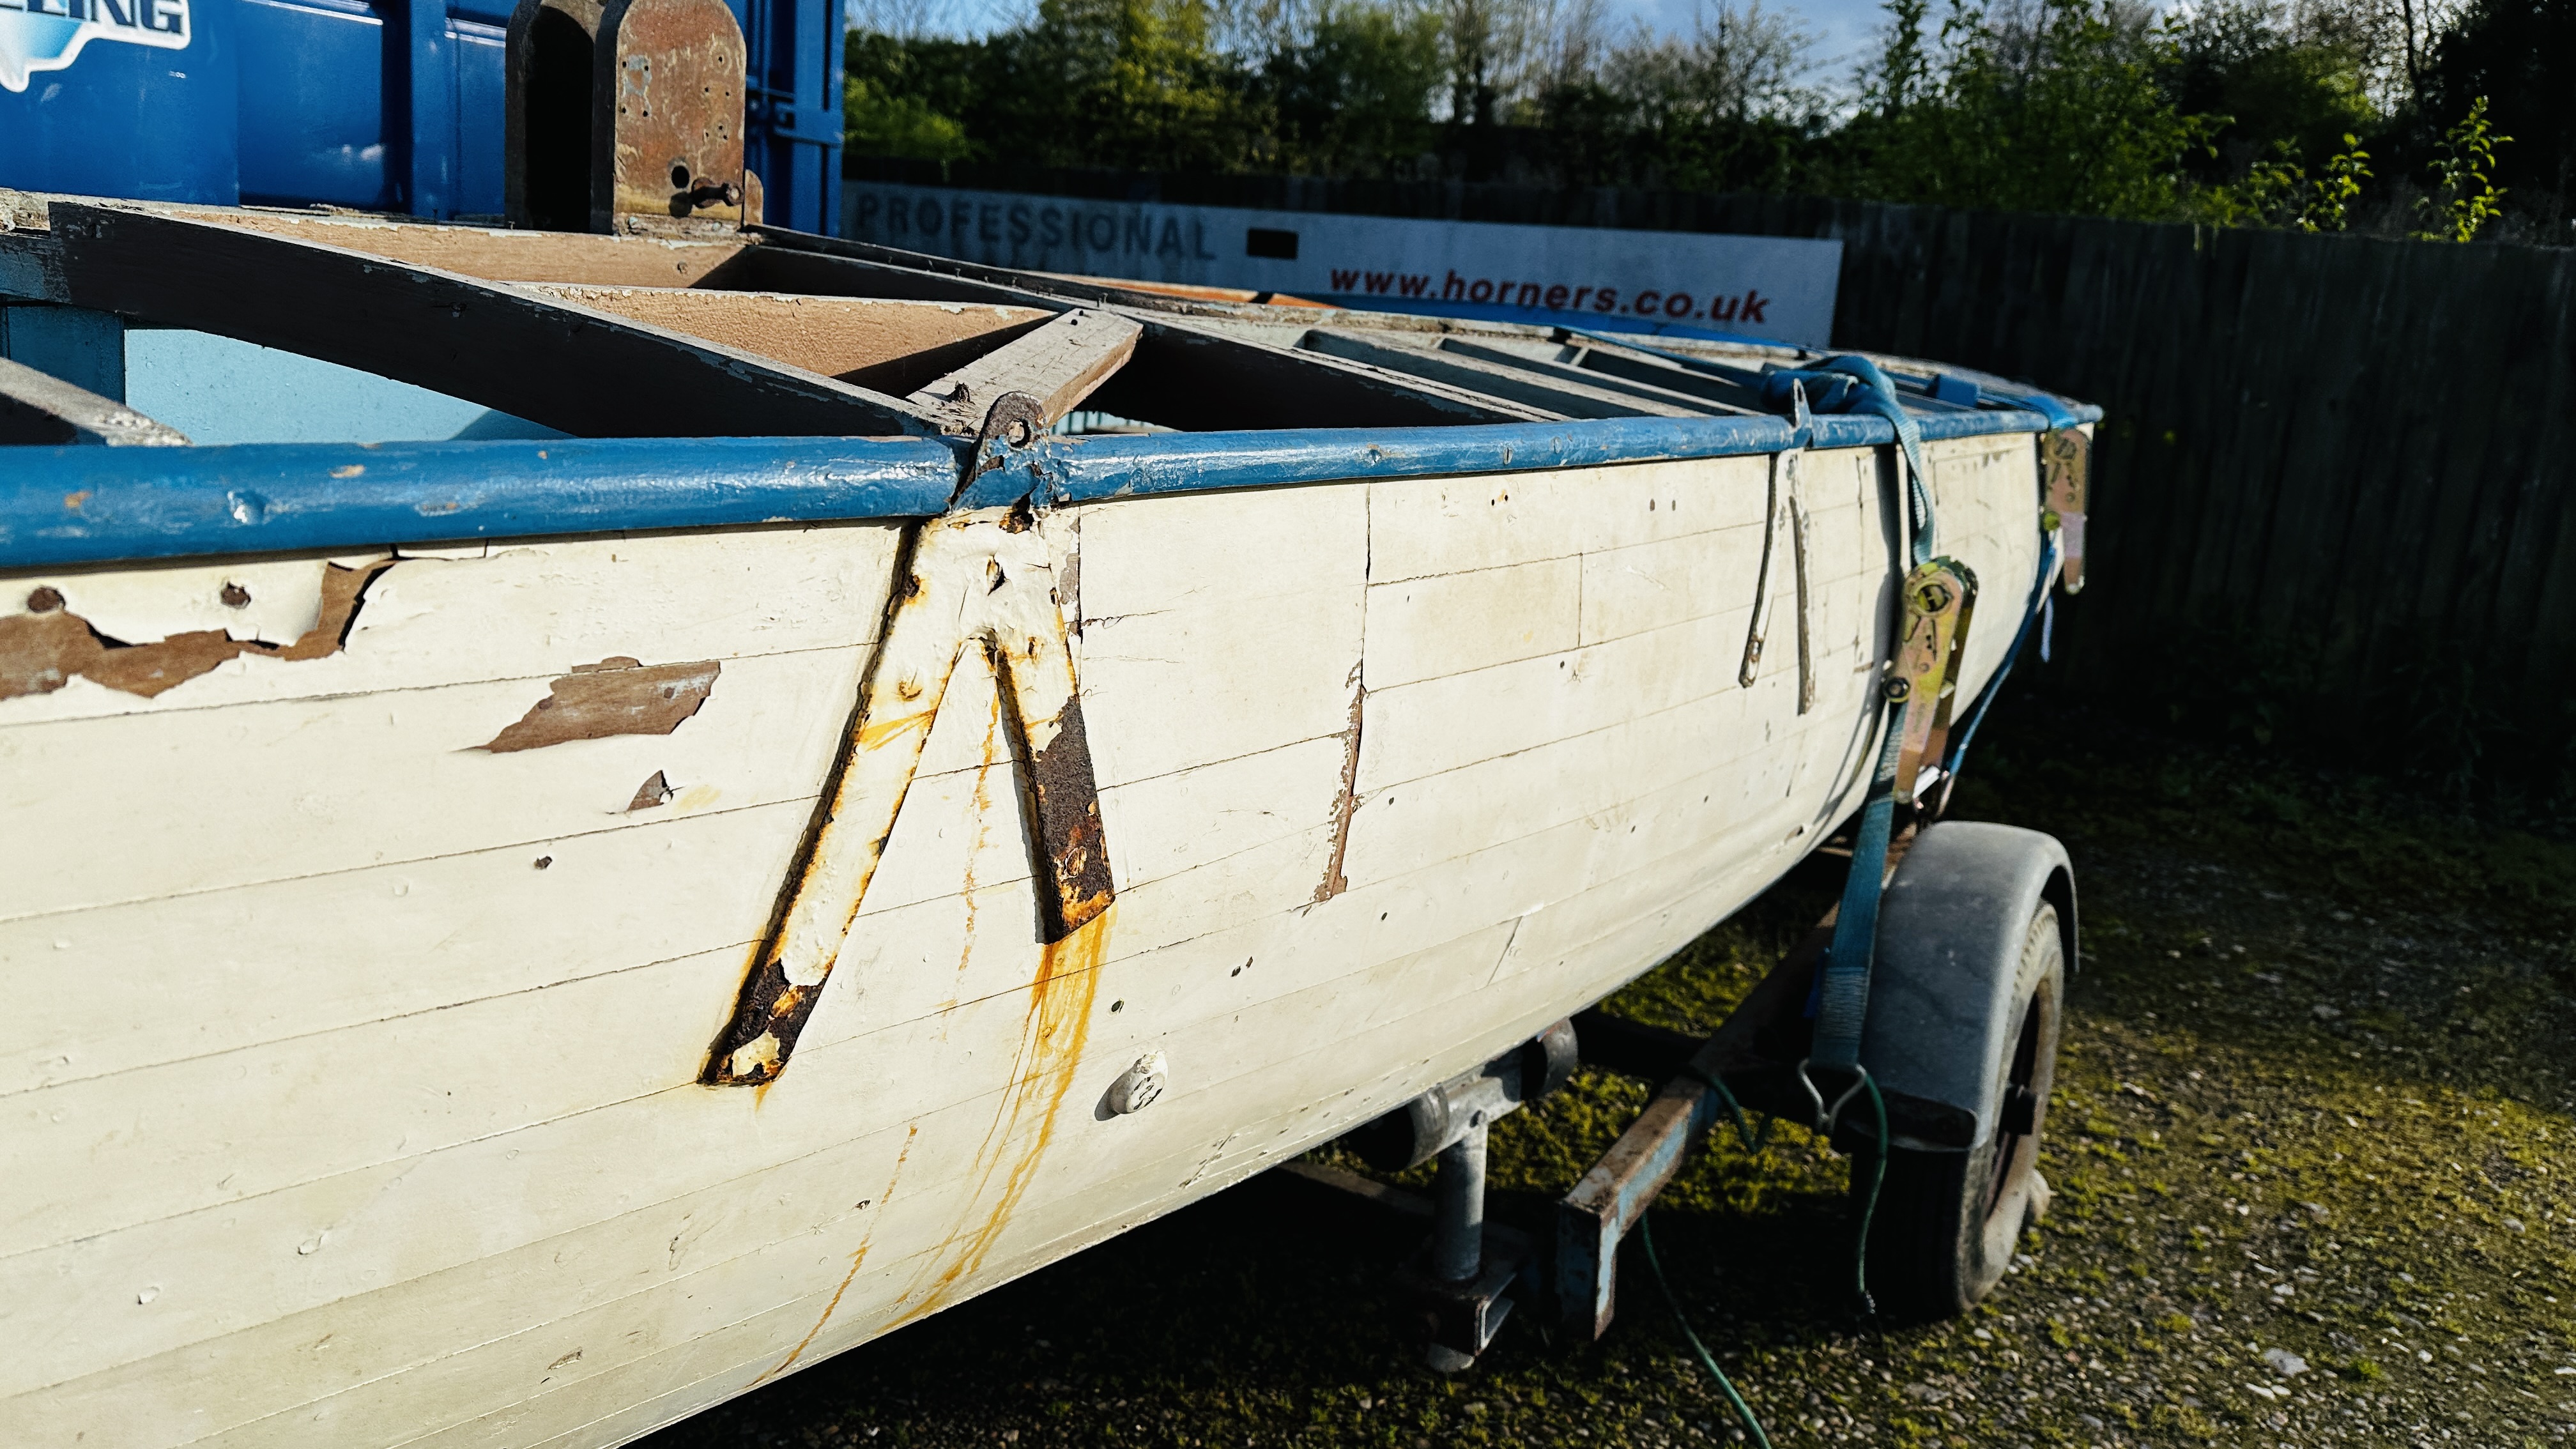 A WW2 UFFA FOX RESCUE BOAT BELIEVED TO BE BUILT BY TAYLOR WOODROW, STAMPED AW11, 1 OF 402 MADE, - Image 33 of 56